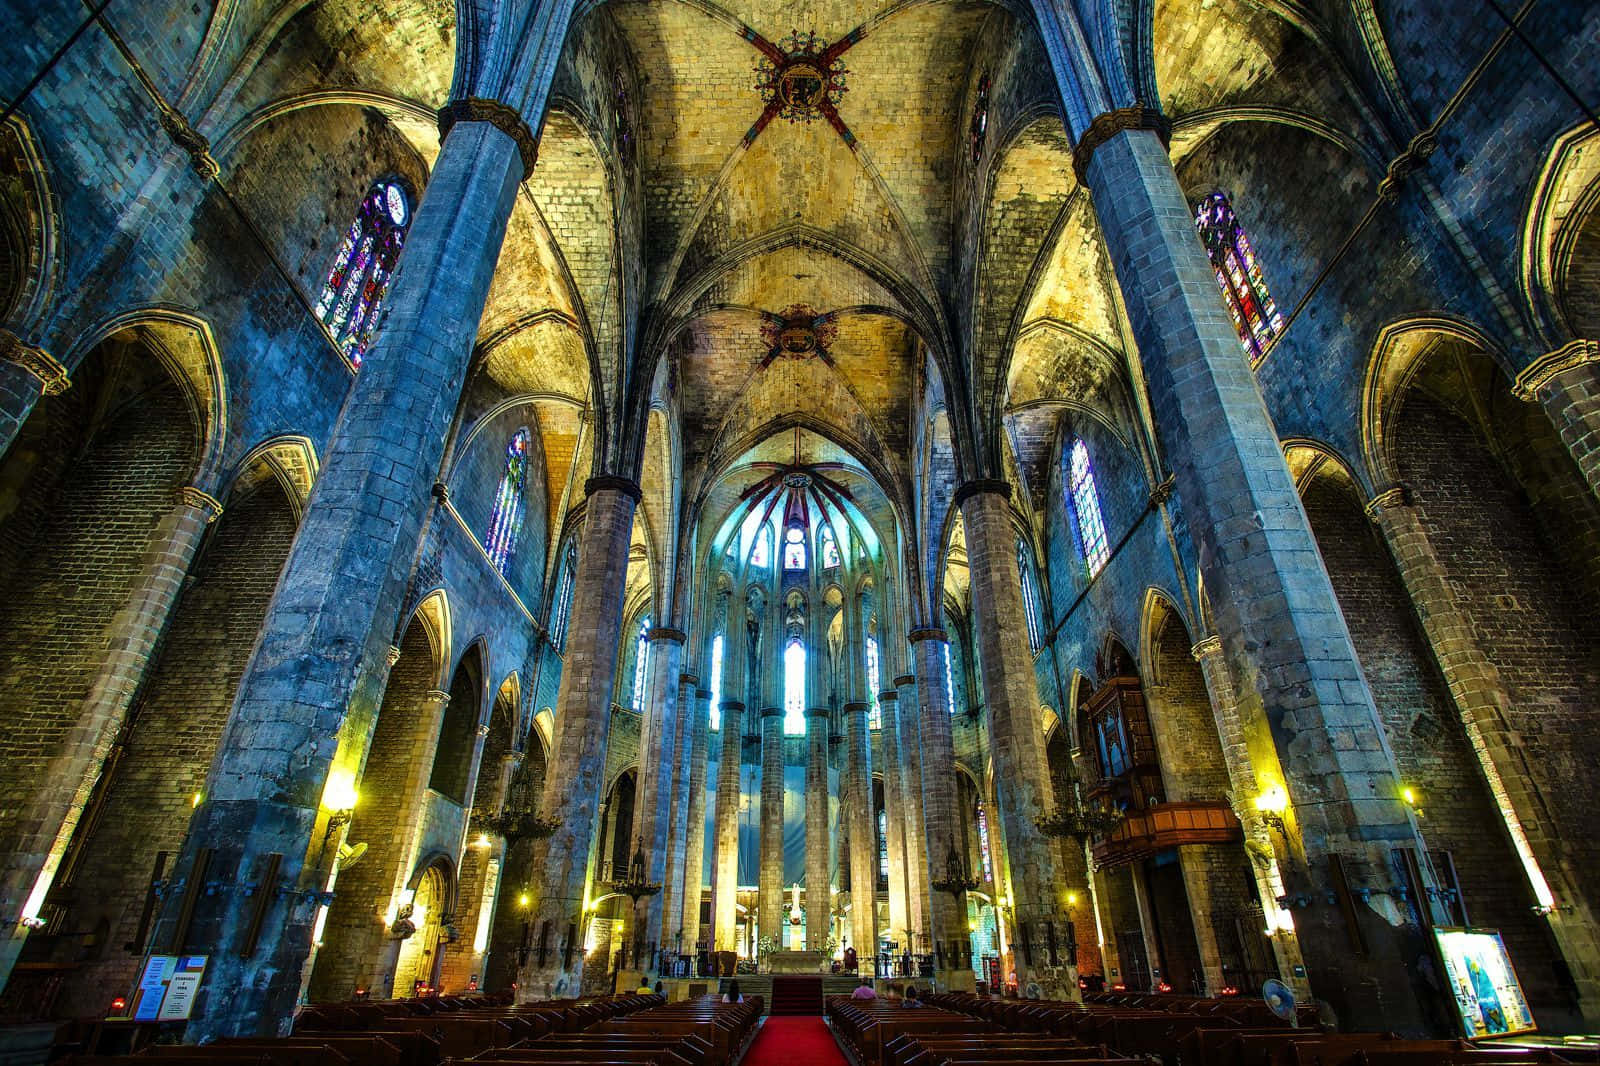 The Ceiling Of The Cathedral Is Blue